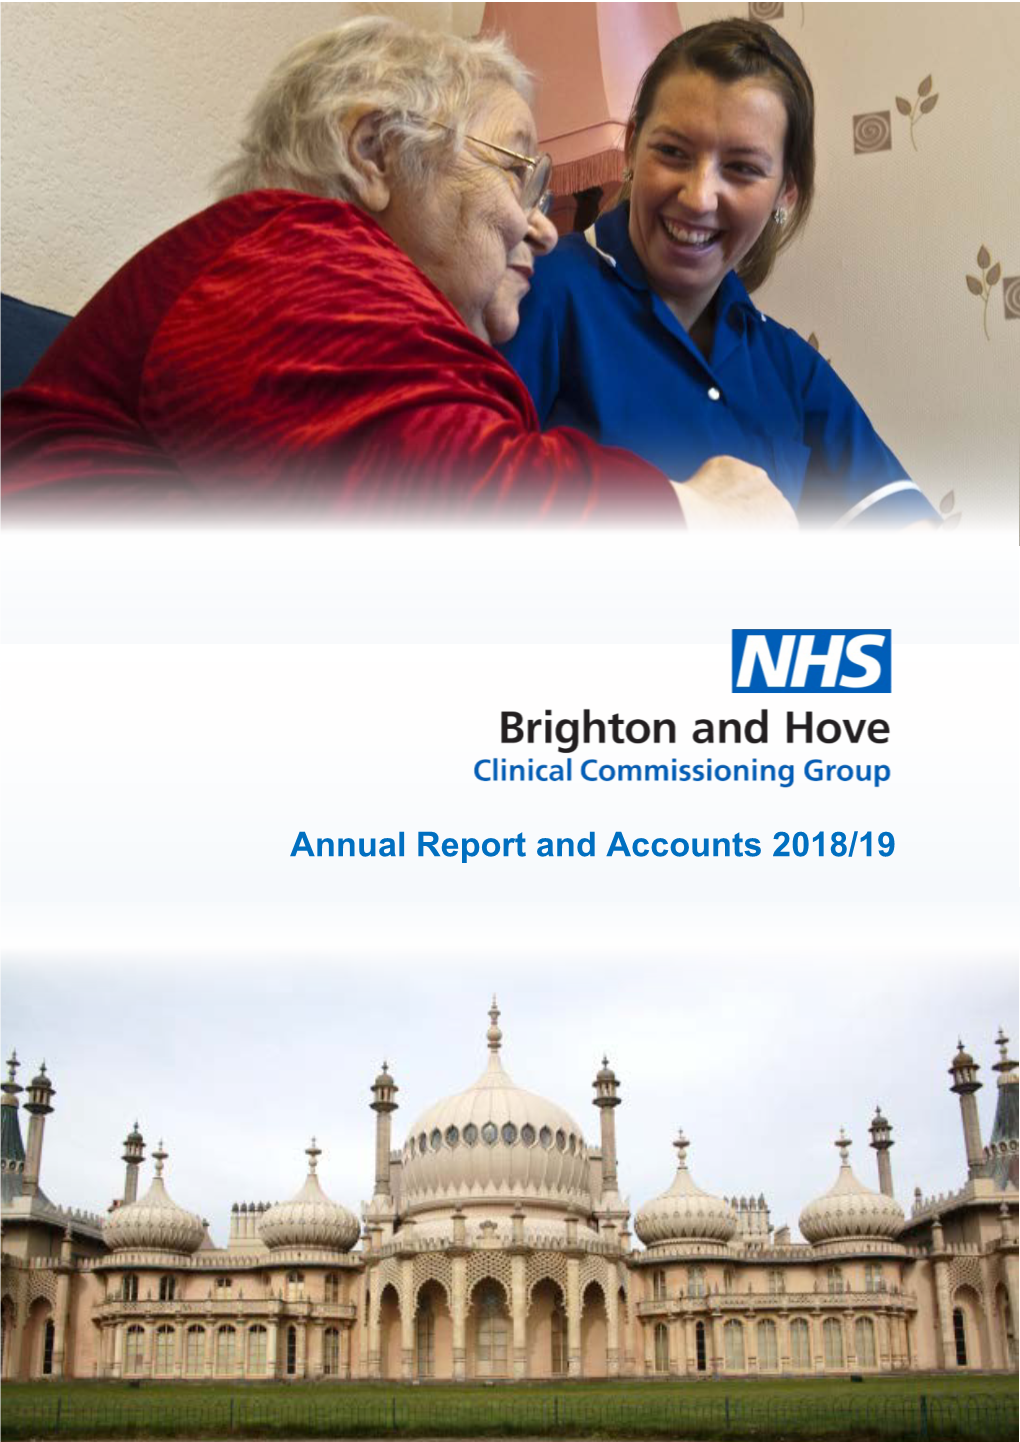 Annual Report and Accounts 2018/19